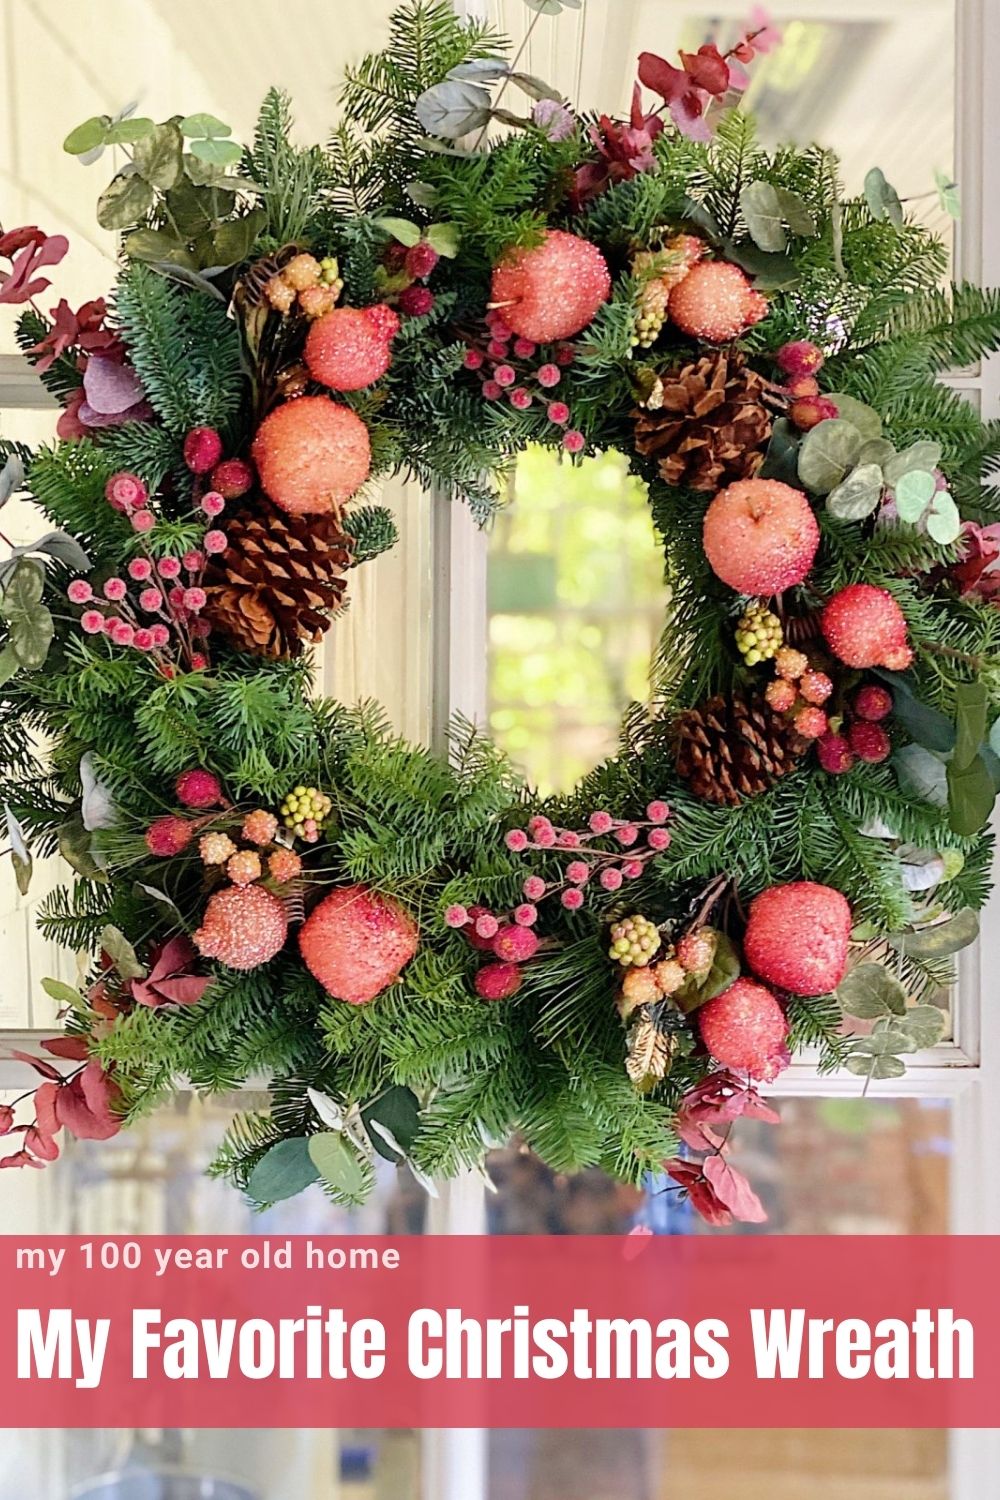 I am a huge fan of decorating with wreaths. I love every kind of Christmas wreath and today I am sharing my favorites.